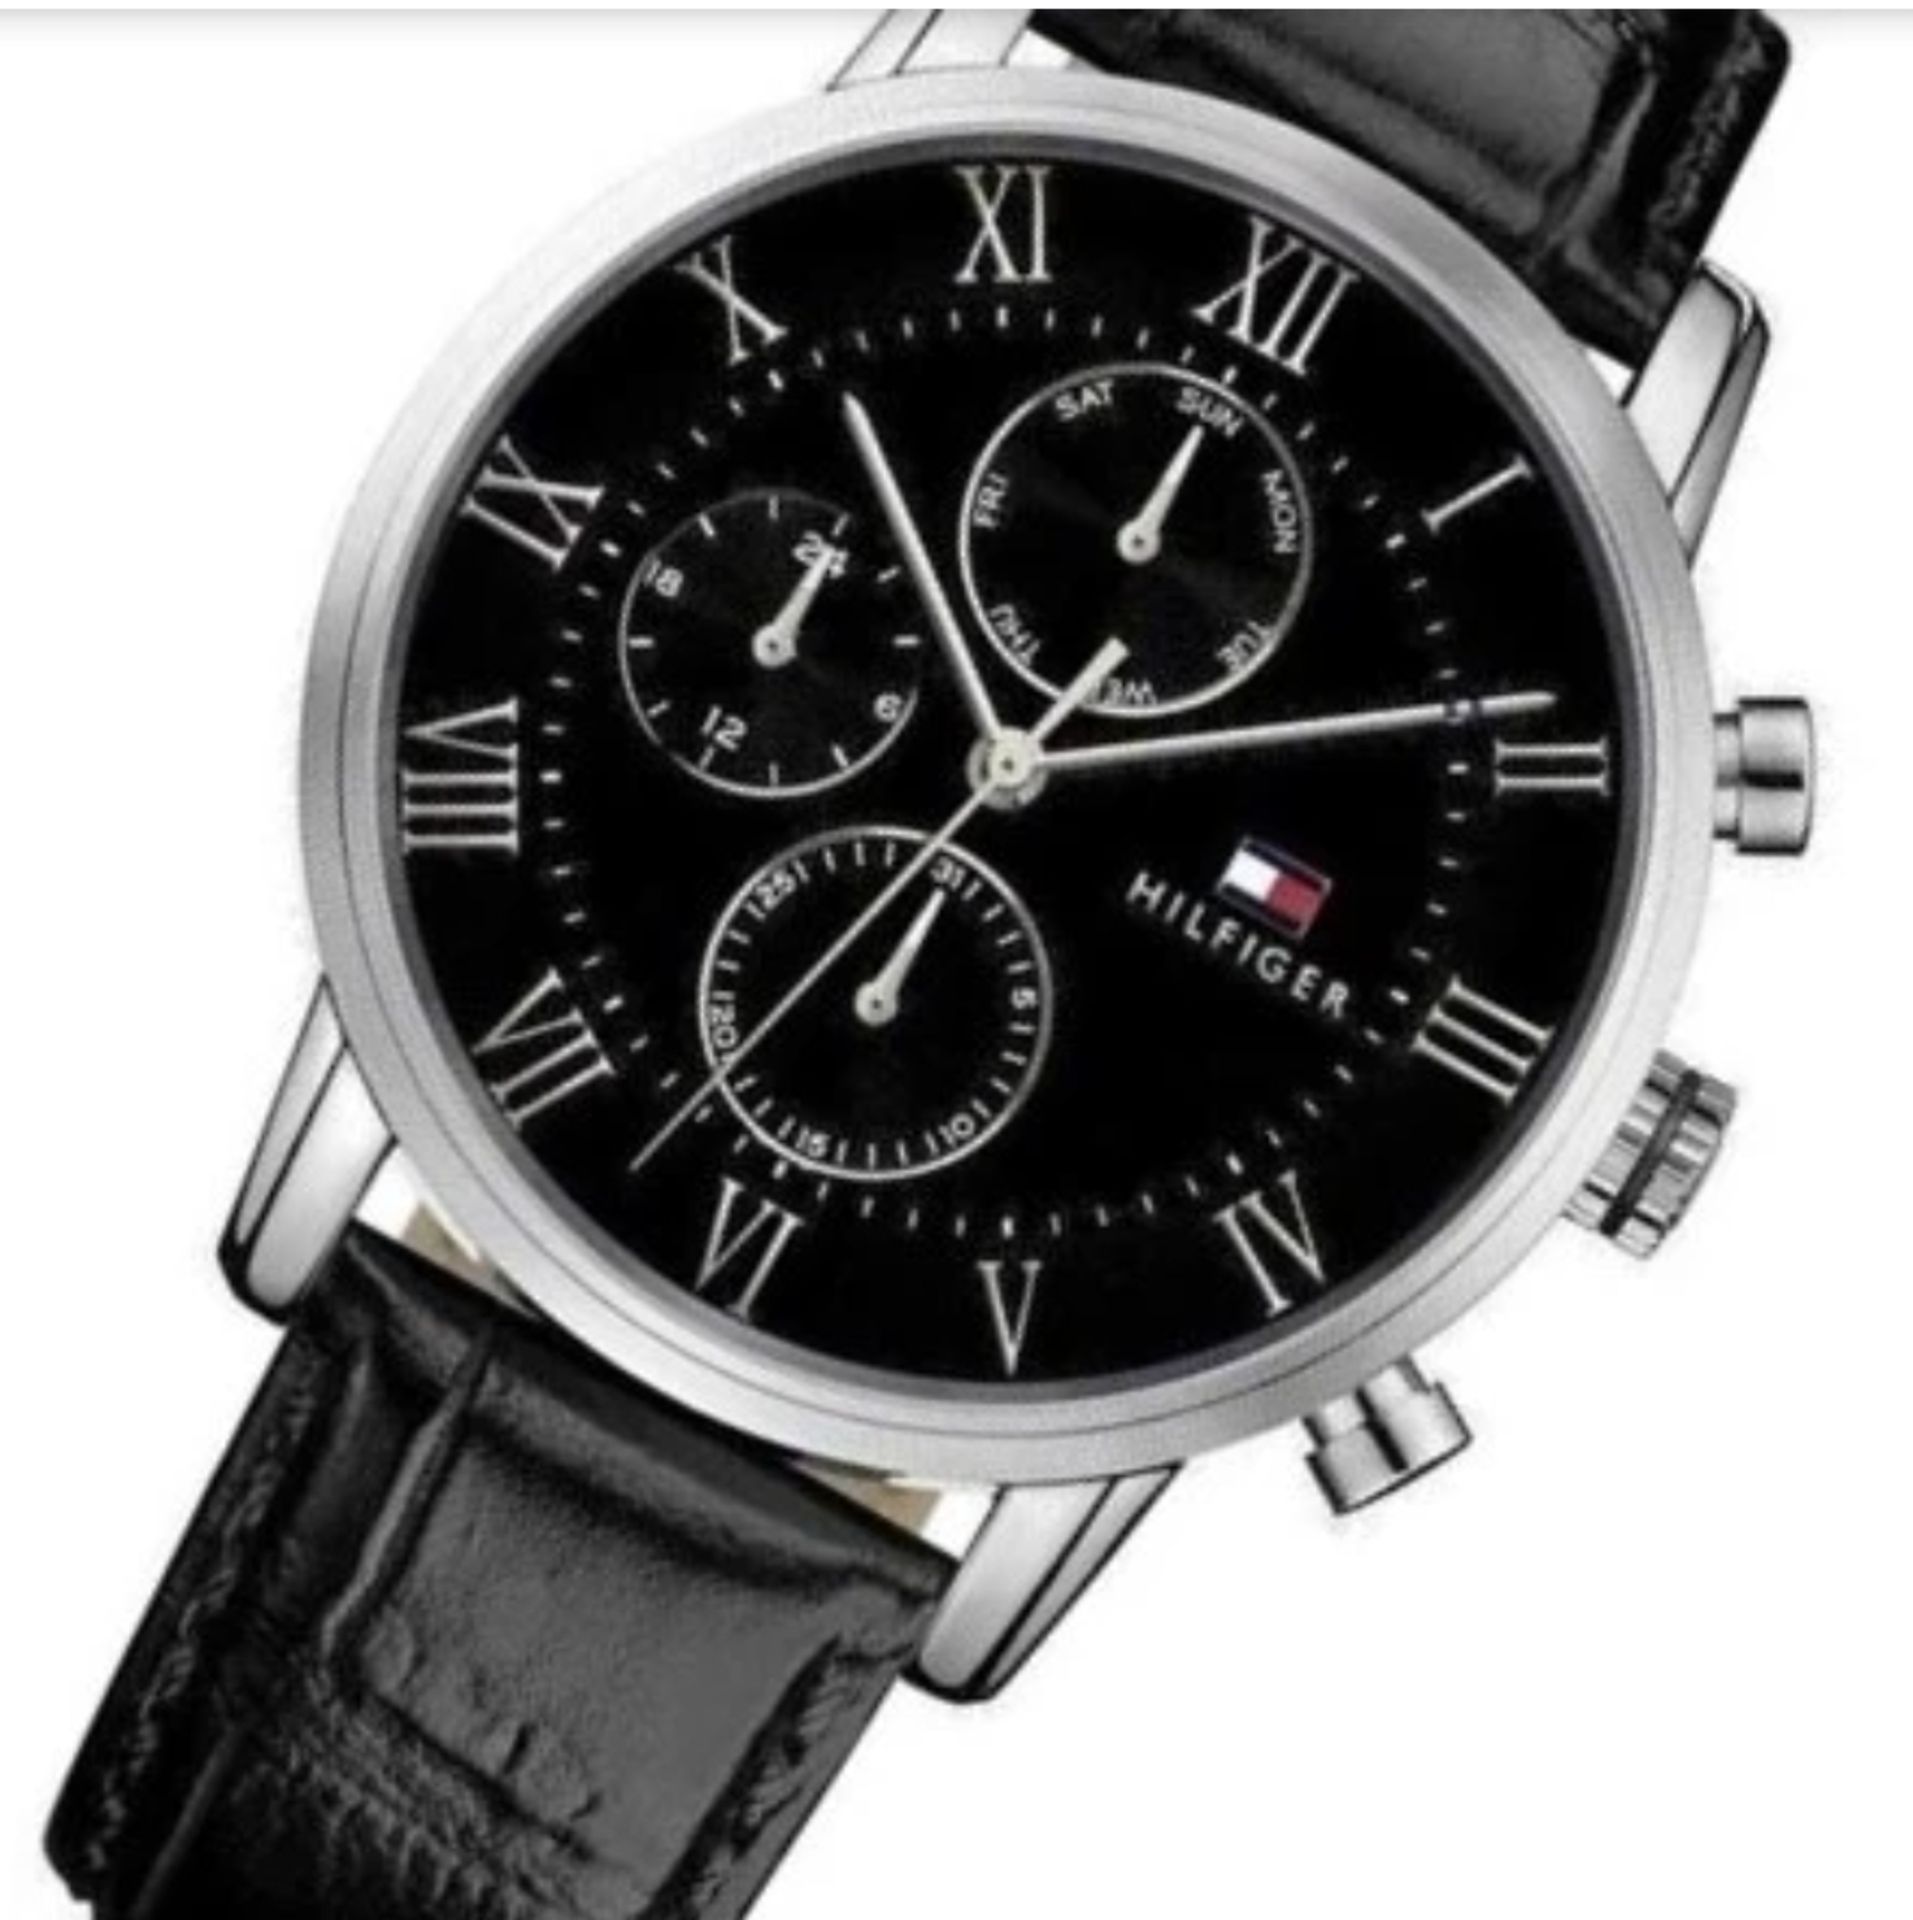 Tommy Hilfiger 1791401 Kane Chronograph Leather Watch In Black - Image 2 of 6